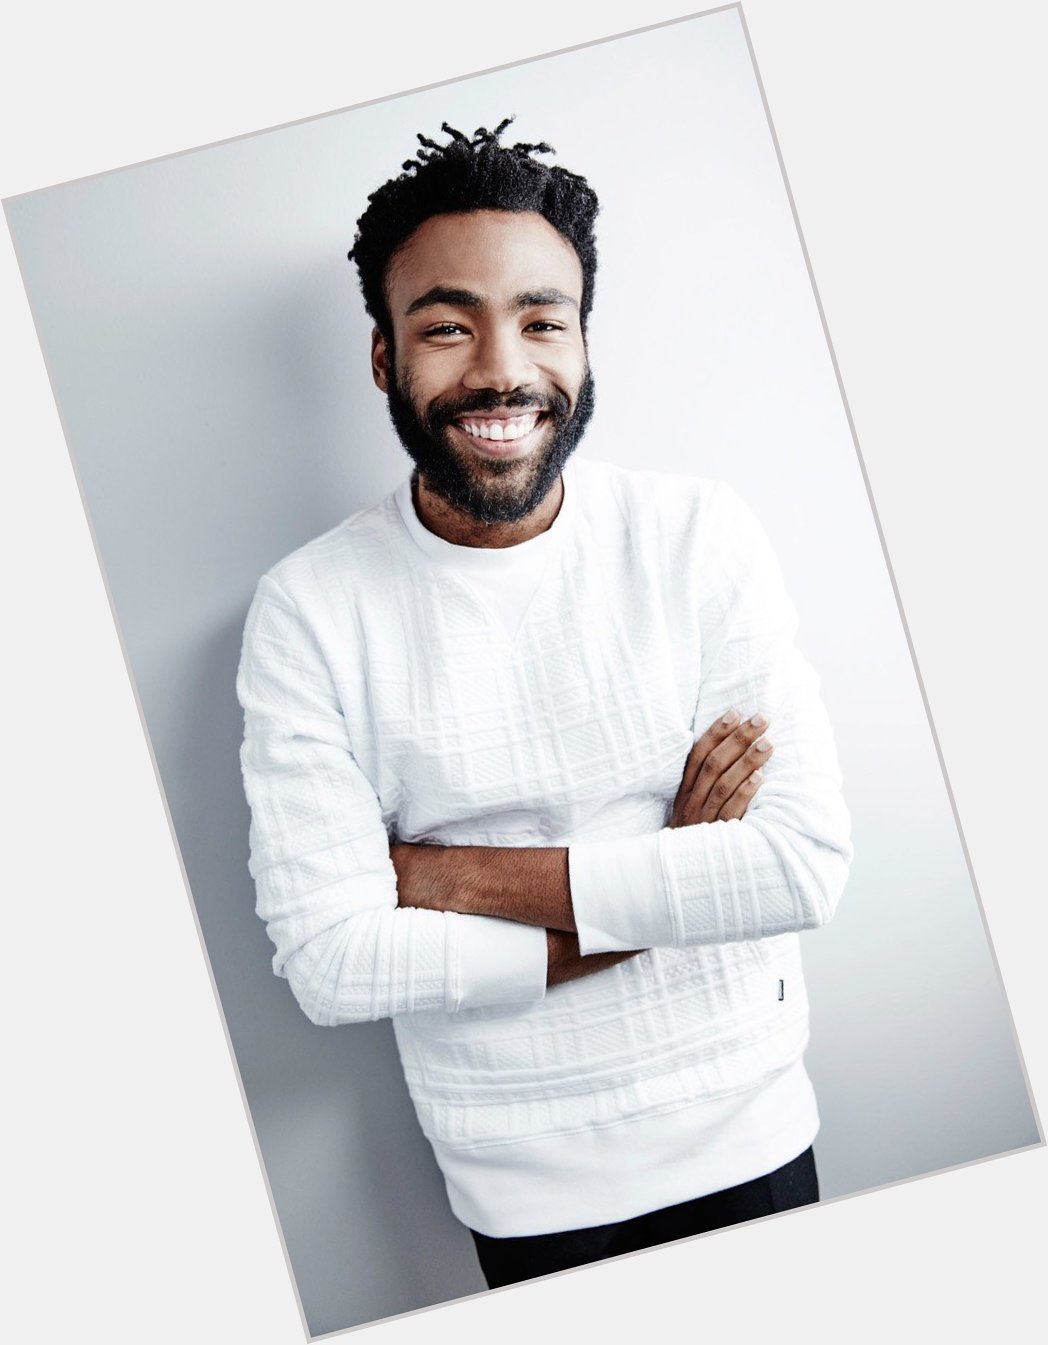 Also a Happy Birthday to Donald Glover.    